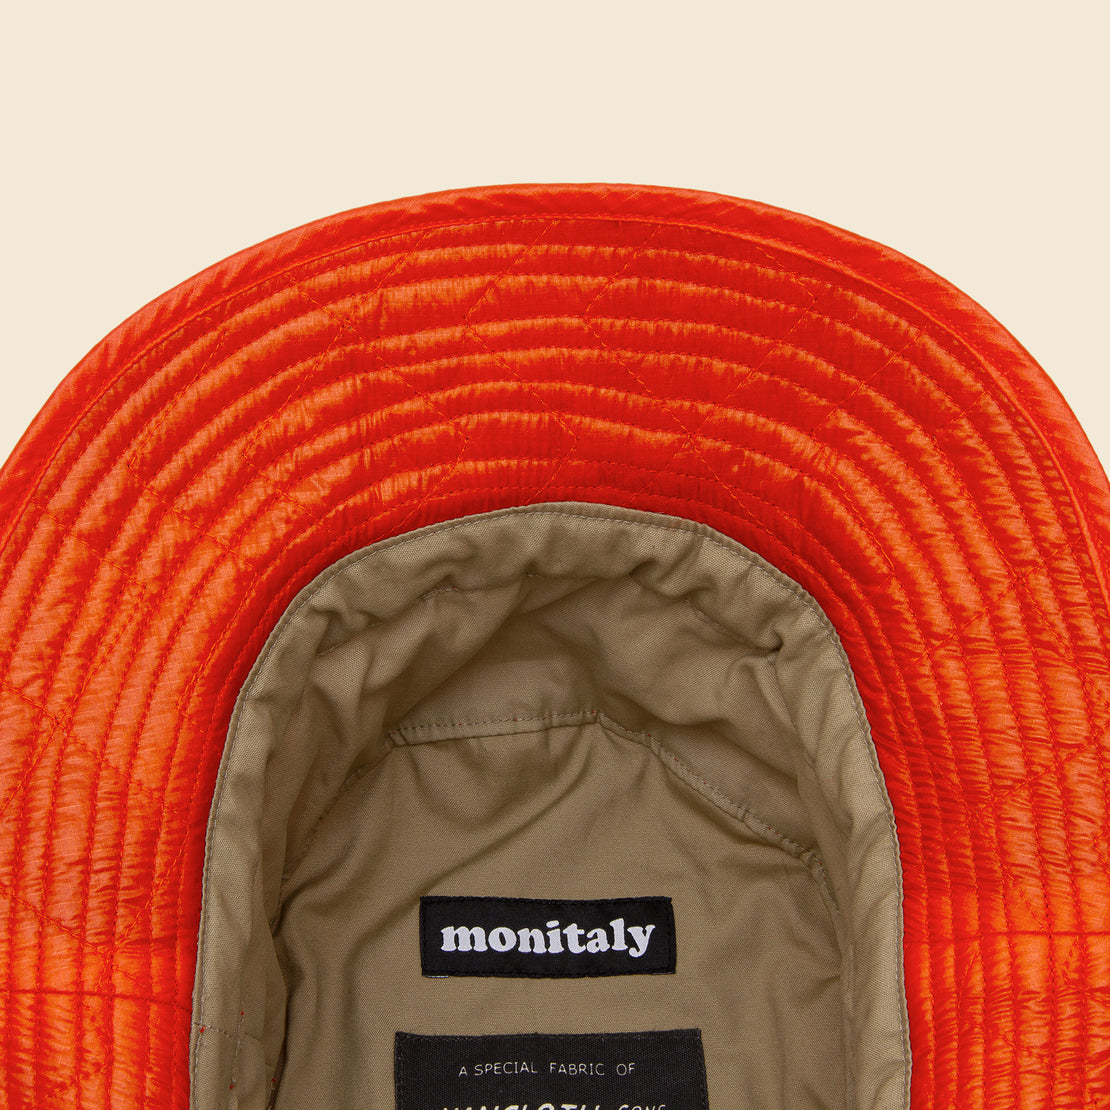 Zigzag Quilted Bucket Hat - Orange - Monitaly - STAG Provisions - Accessories - Hats